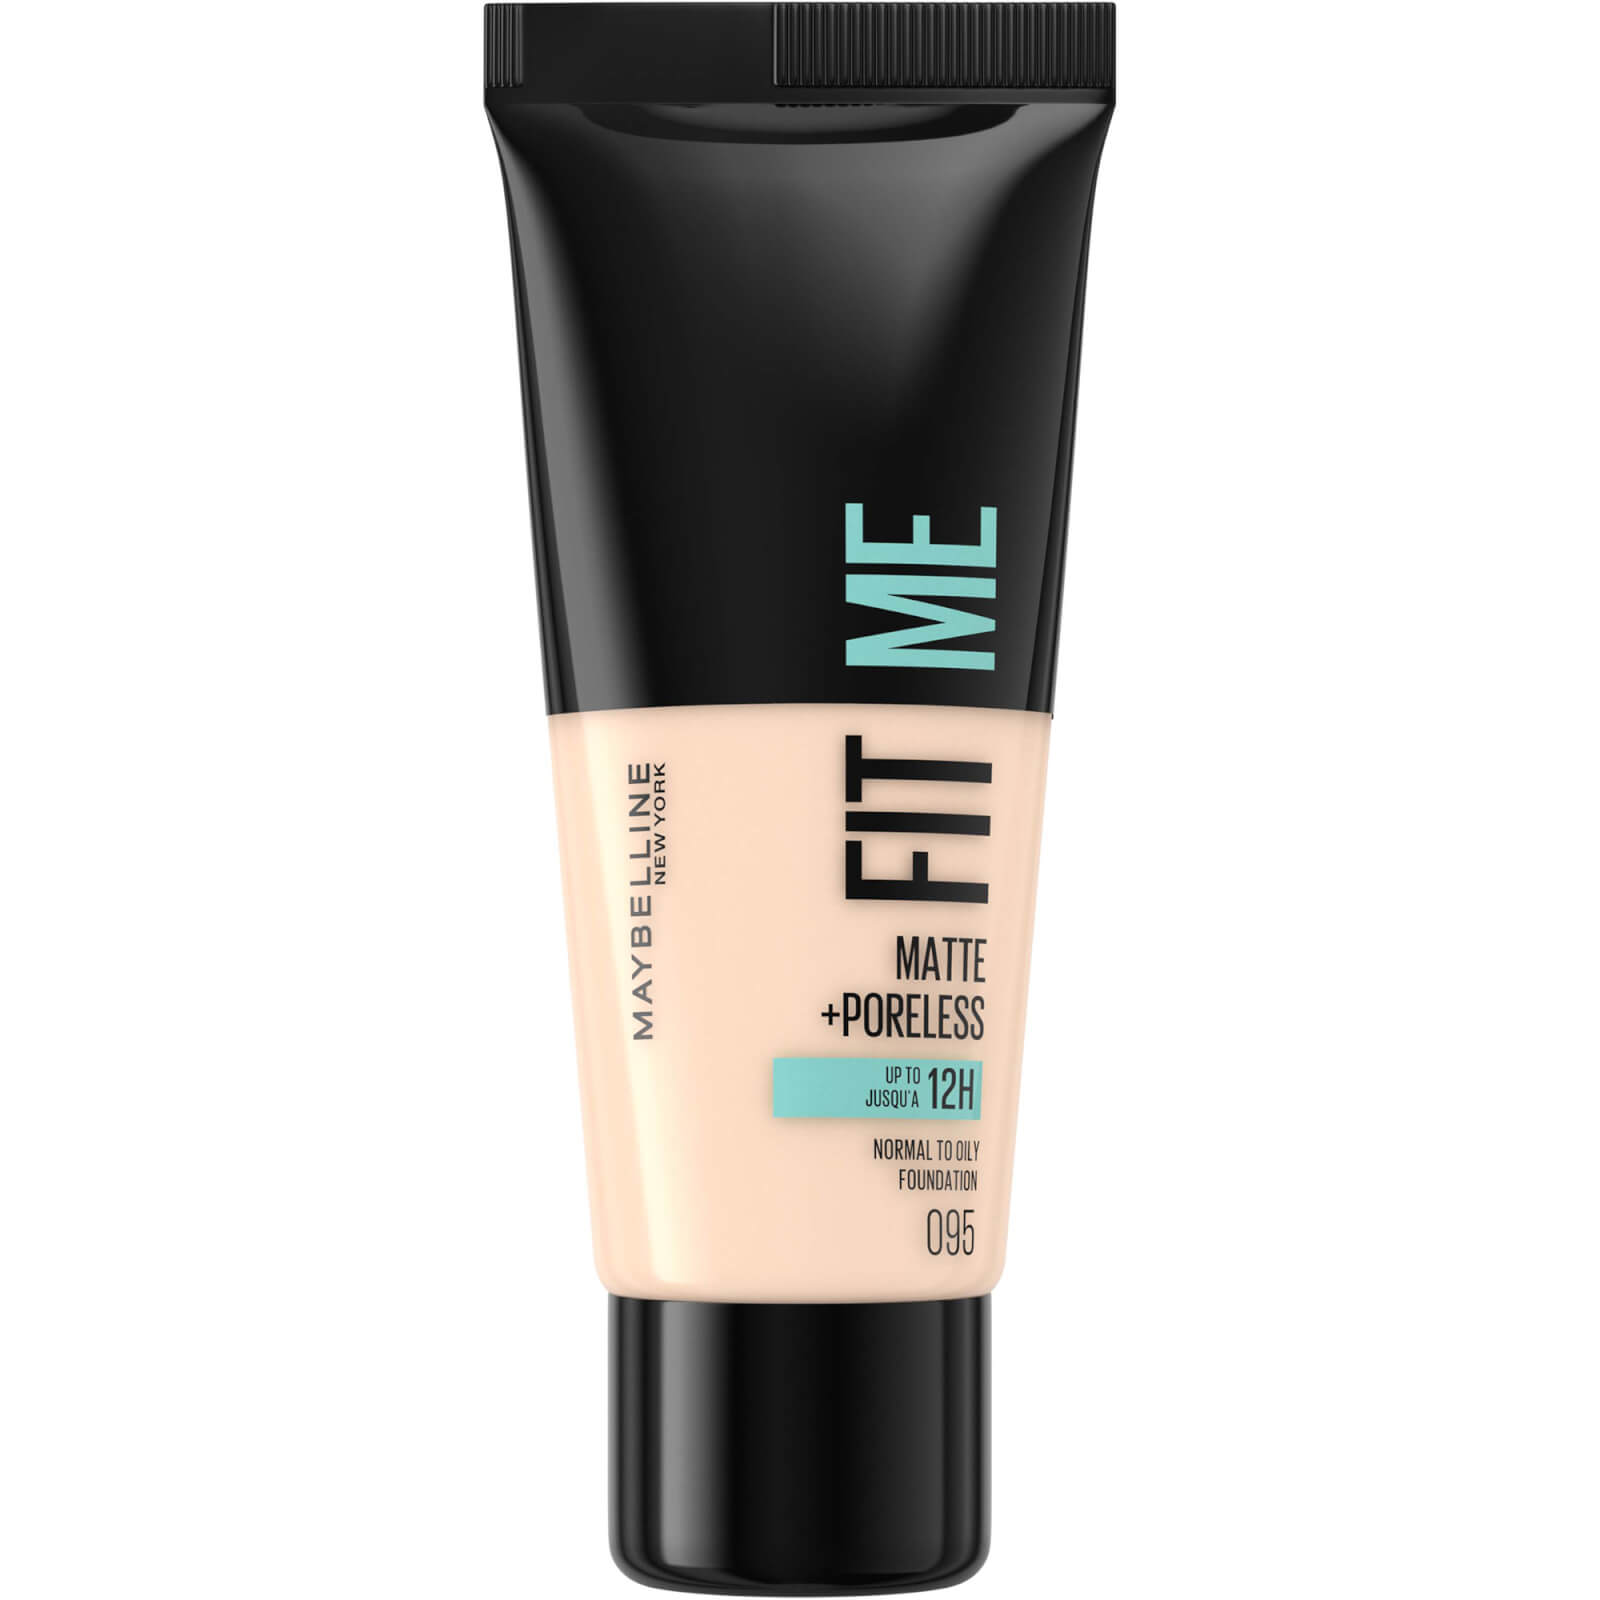 Maybelline Fit Me! Matte and Poreless Foundation 30ml (Various Shades) - 095 Fair Porcelain